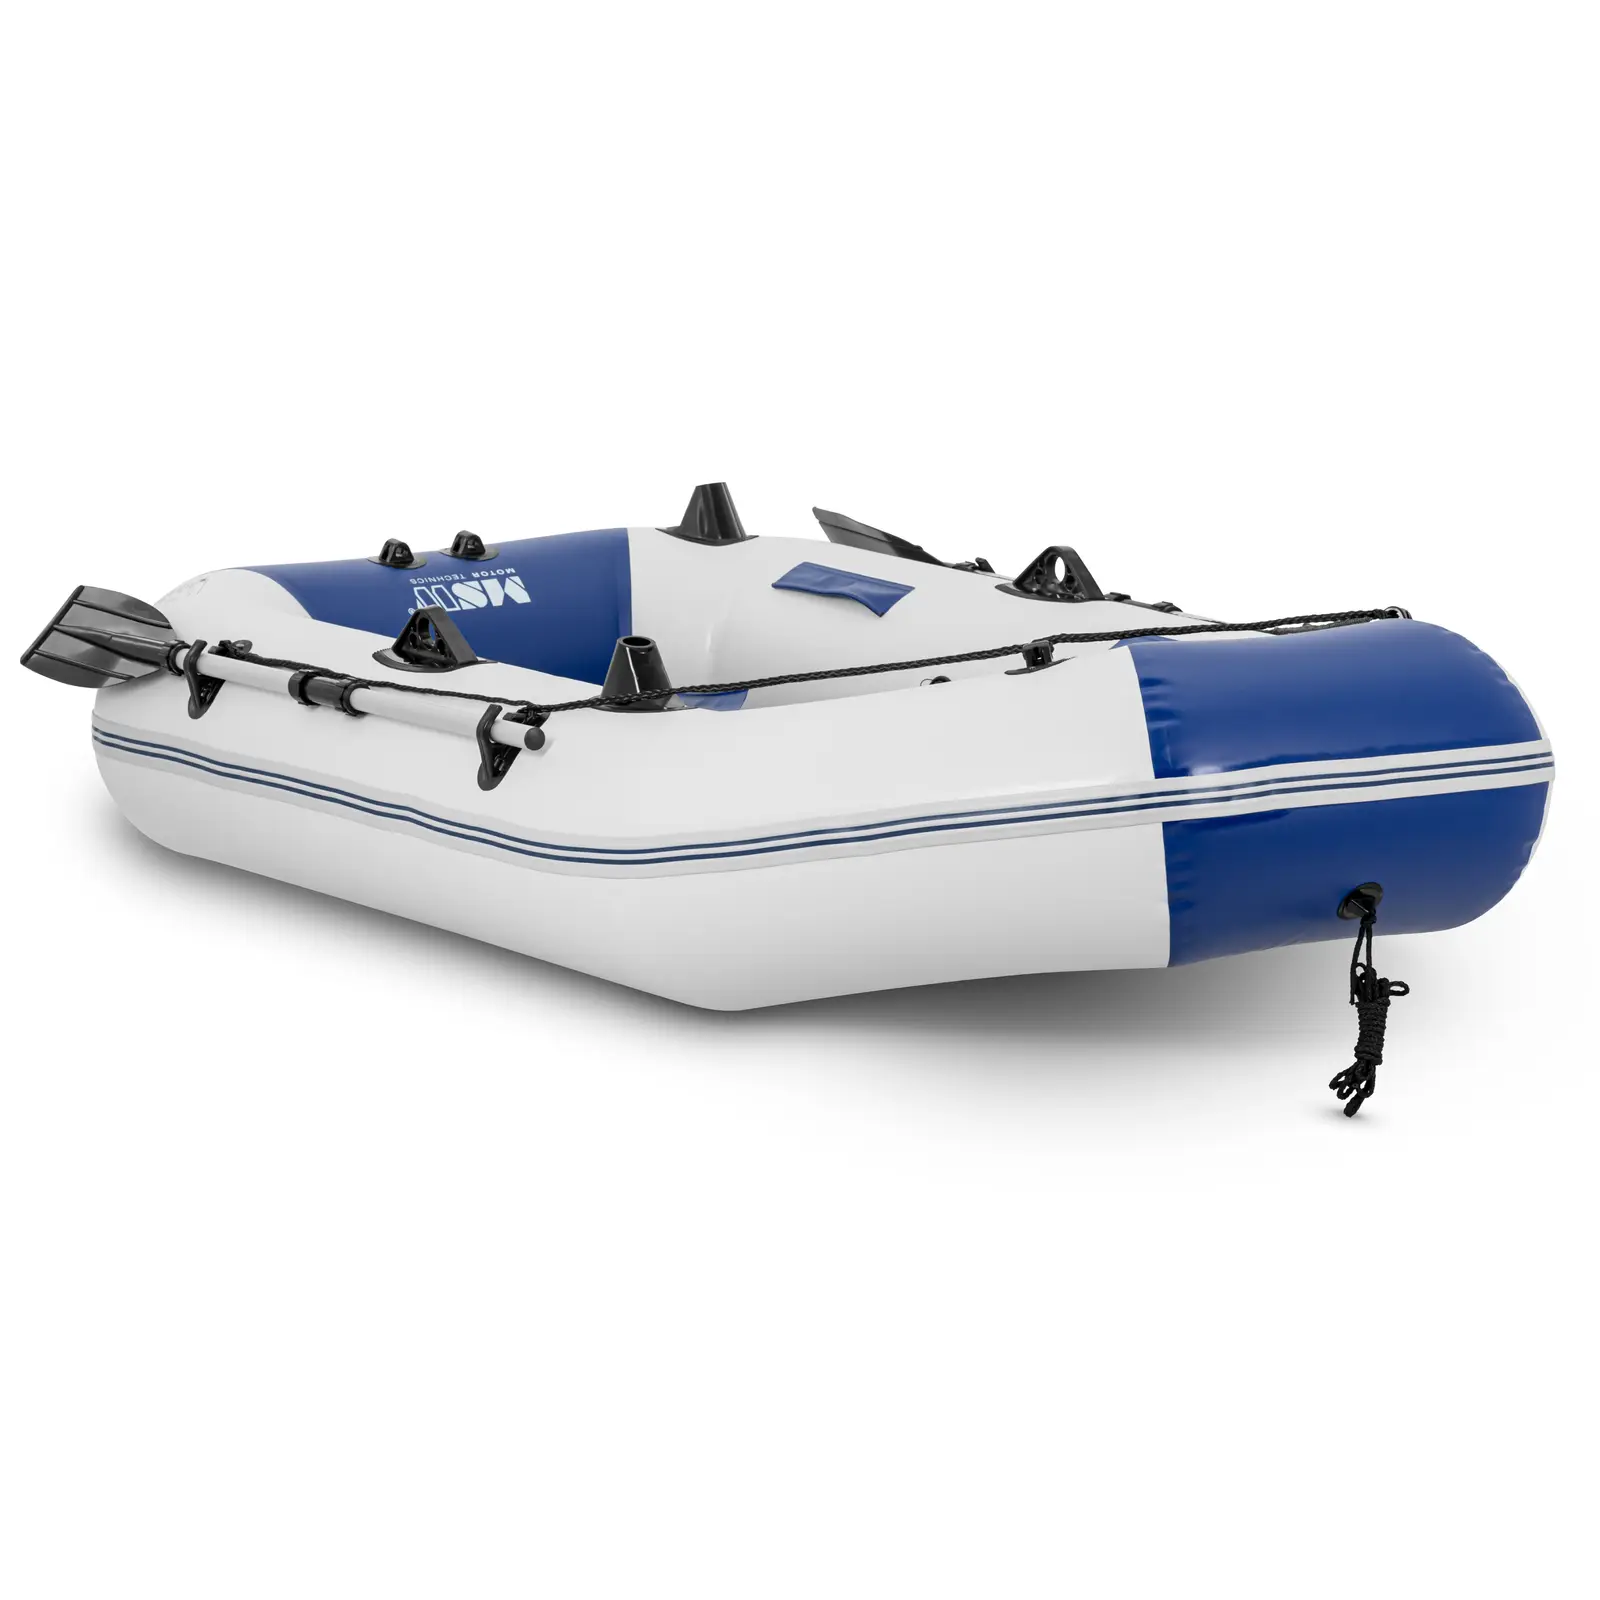 Inflatable Boat - blue / white - 235 kg - fishing rod holder - 3 persons